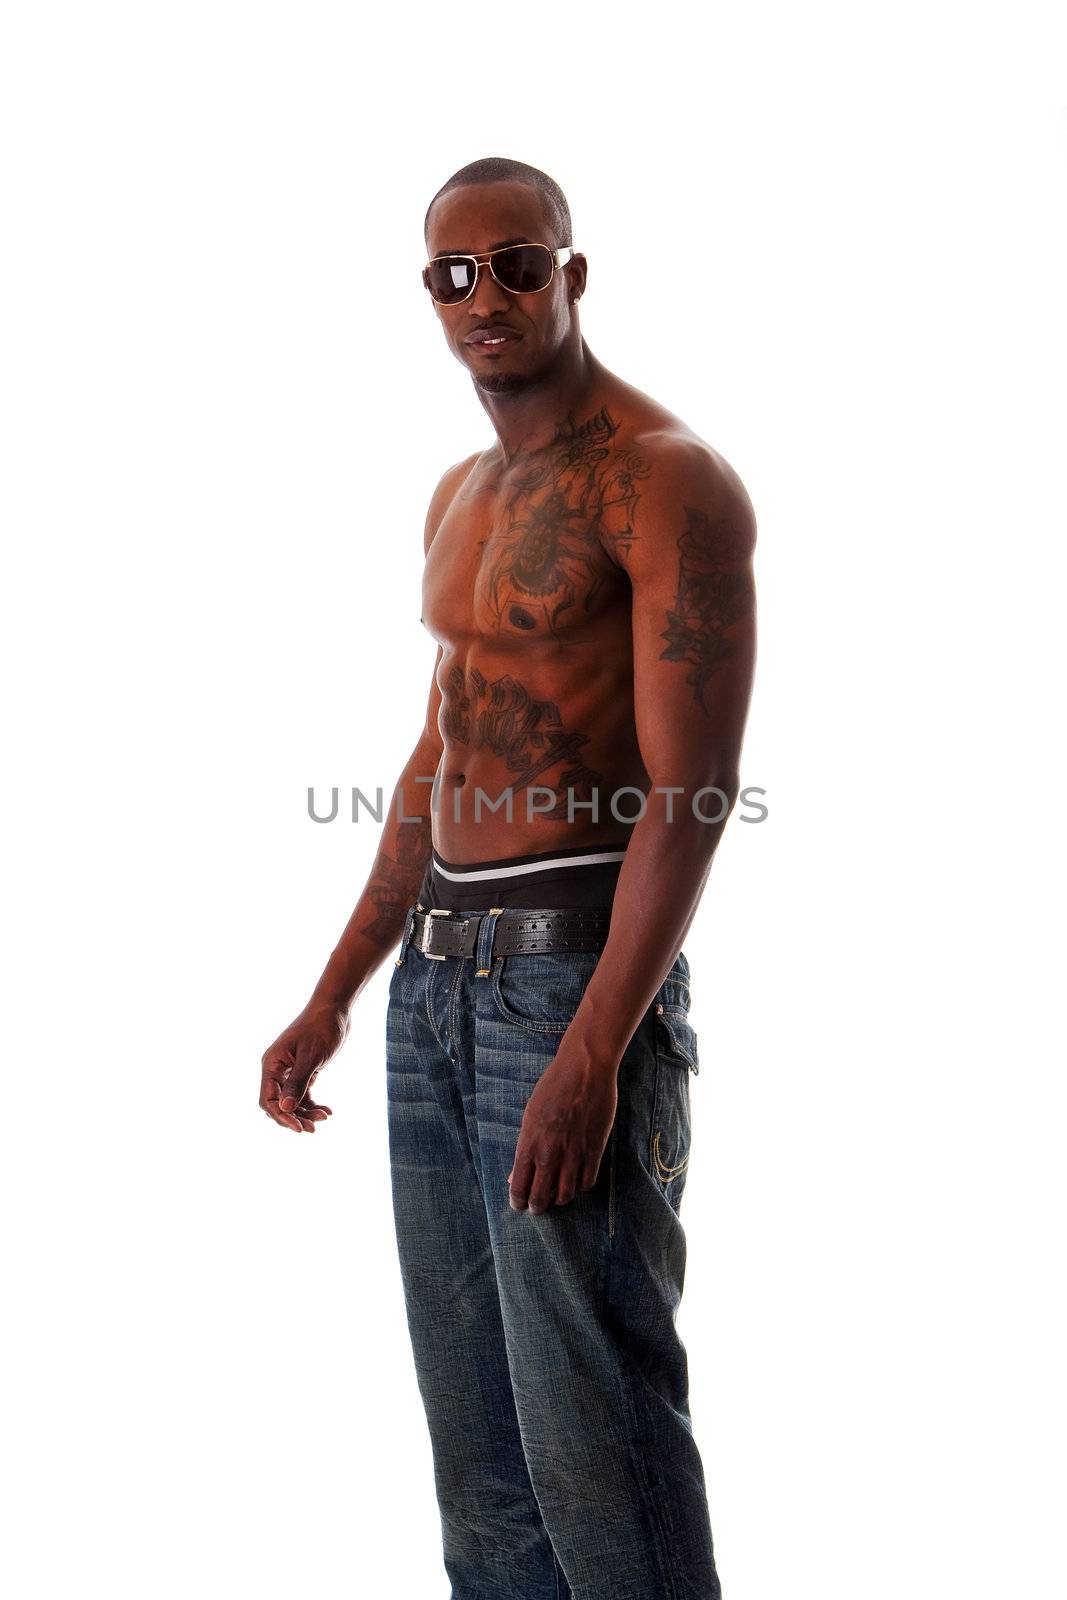 Handsome fit African American male with tough attitude standing sideways, toned body and tattoos, wearing blue jeans and sunglasses, showing rim of underwear, isolated